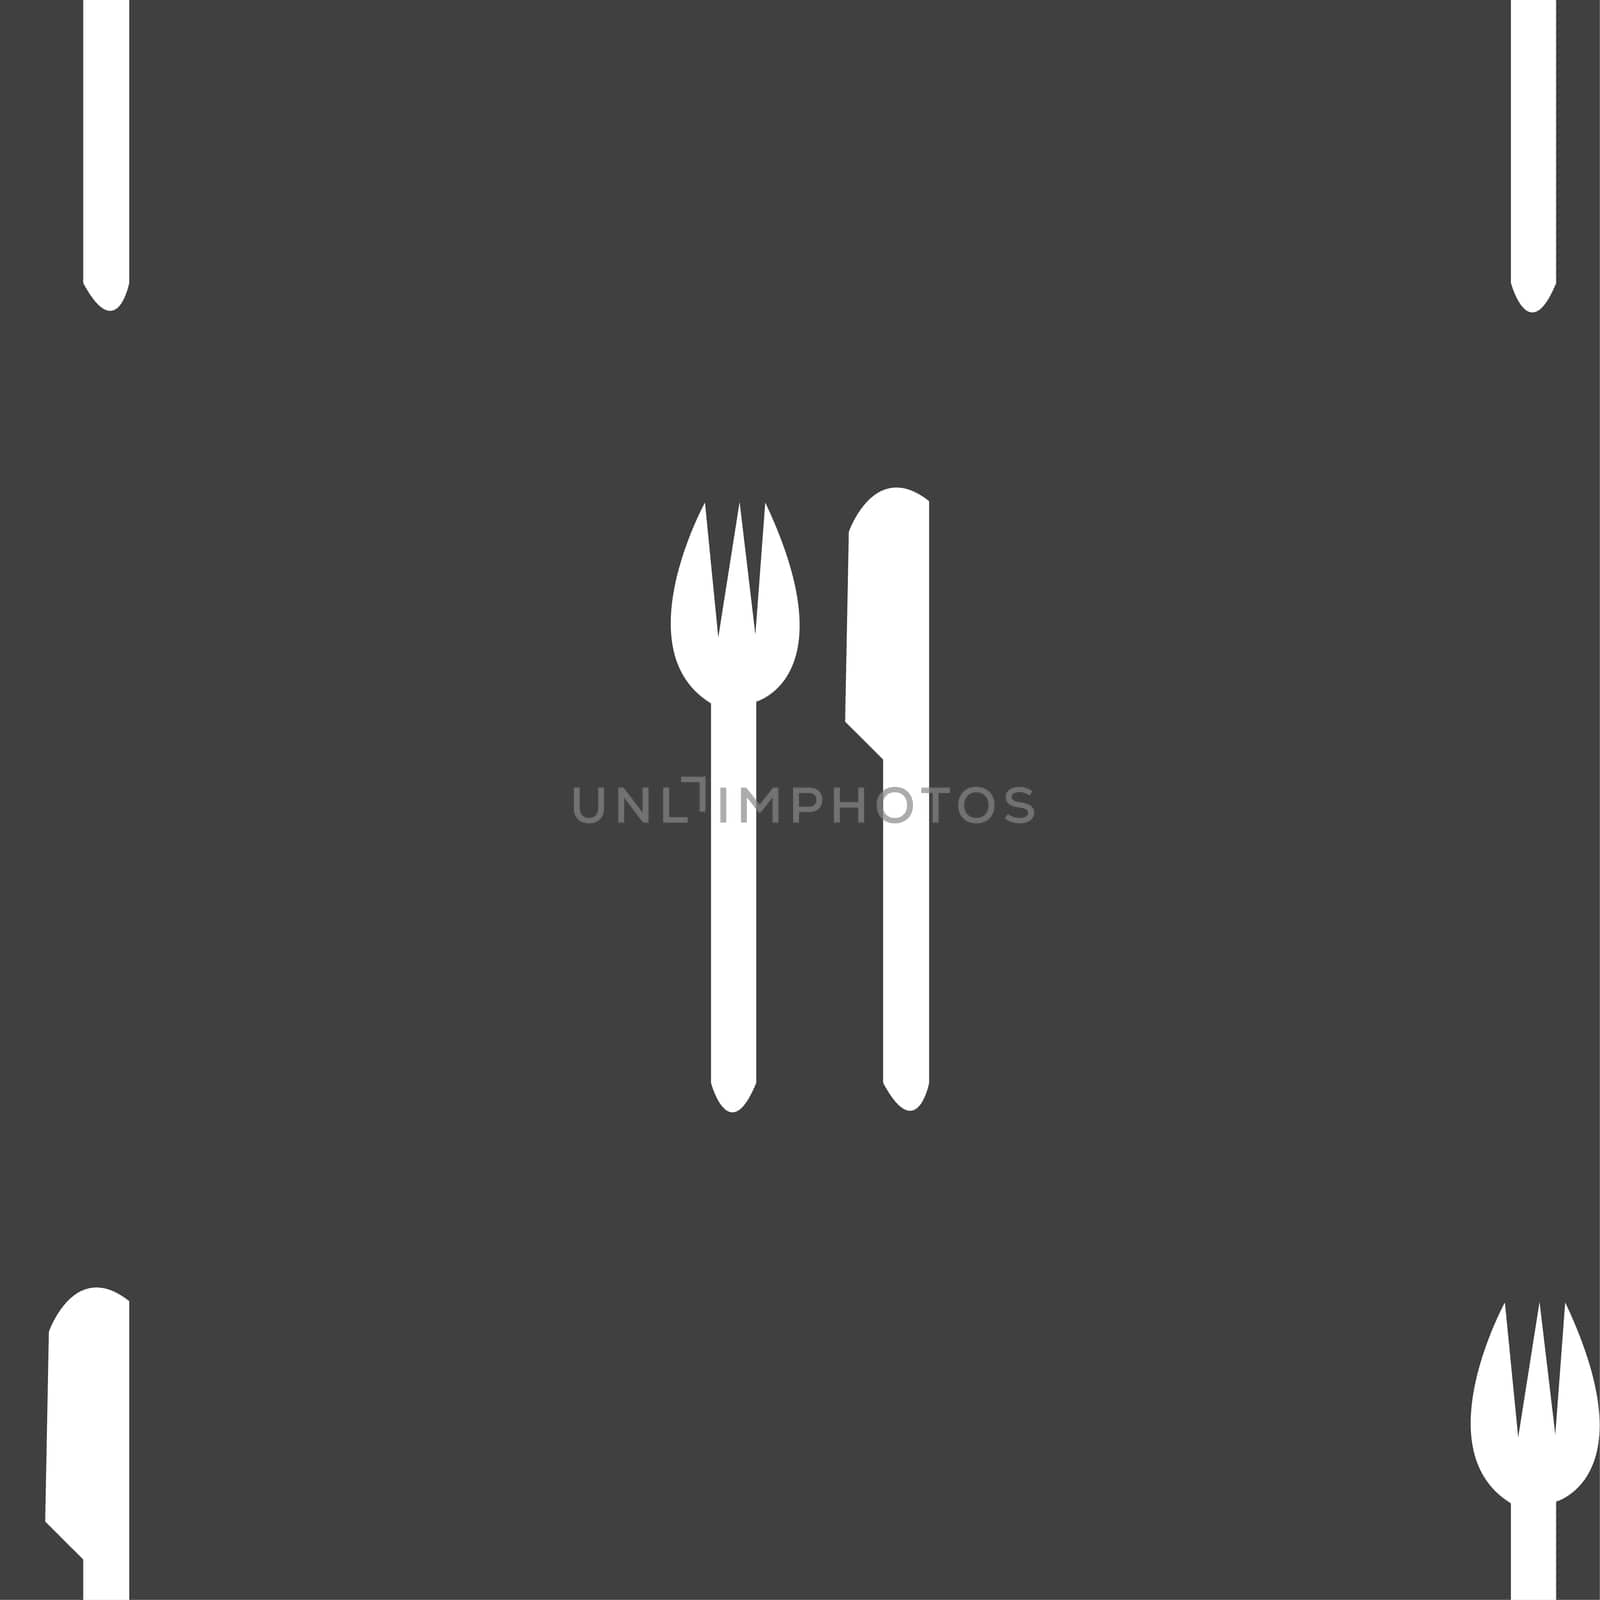 Eat sign icon. Cutlery symbol. Fork and knife. Seamless pattern on a gray background. illustration